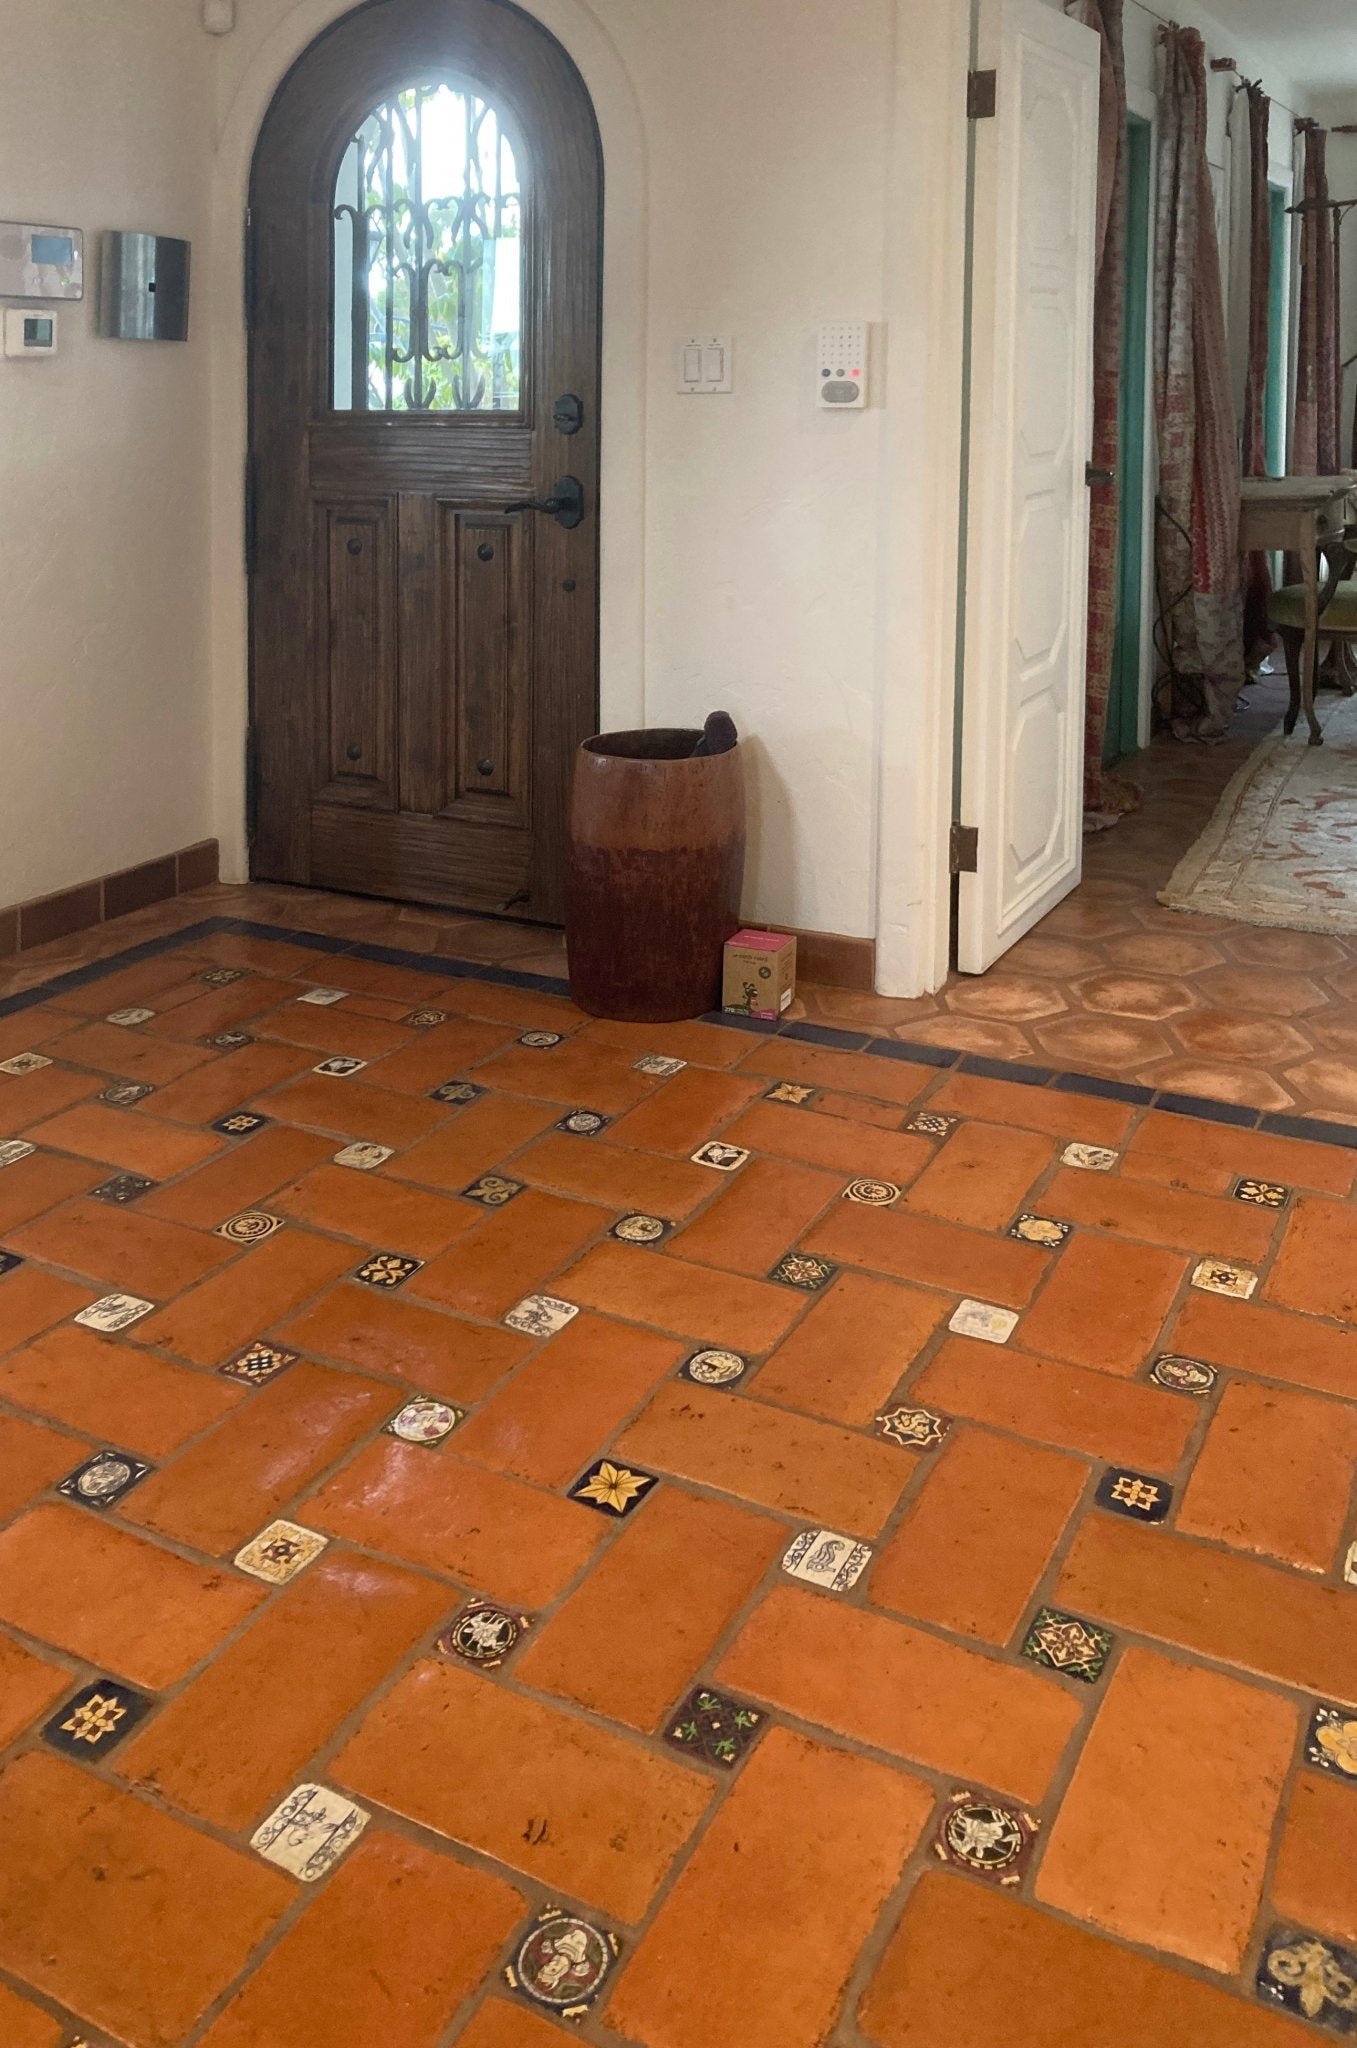 Image shows the actual Mexican Tile the floorcloth pattern is based on.